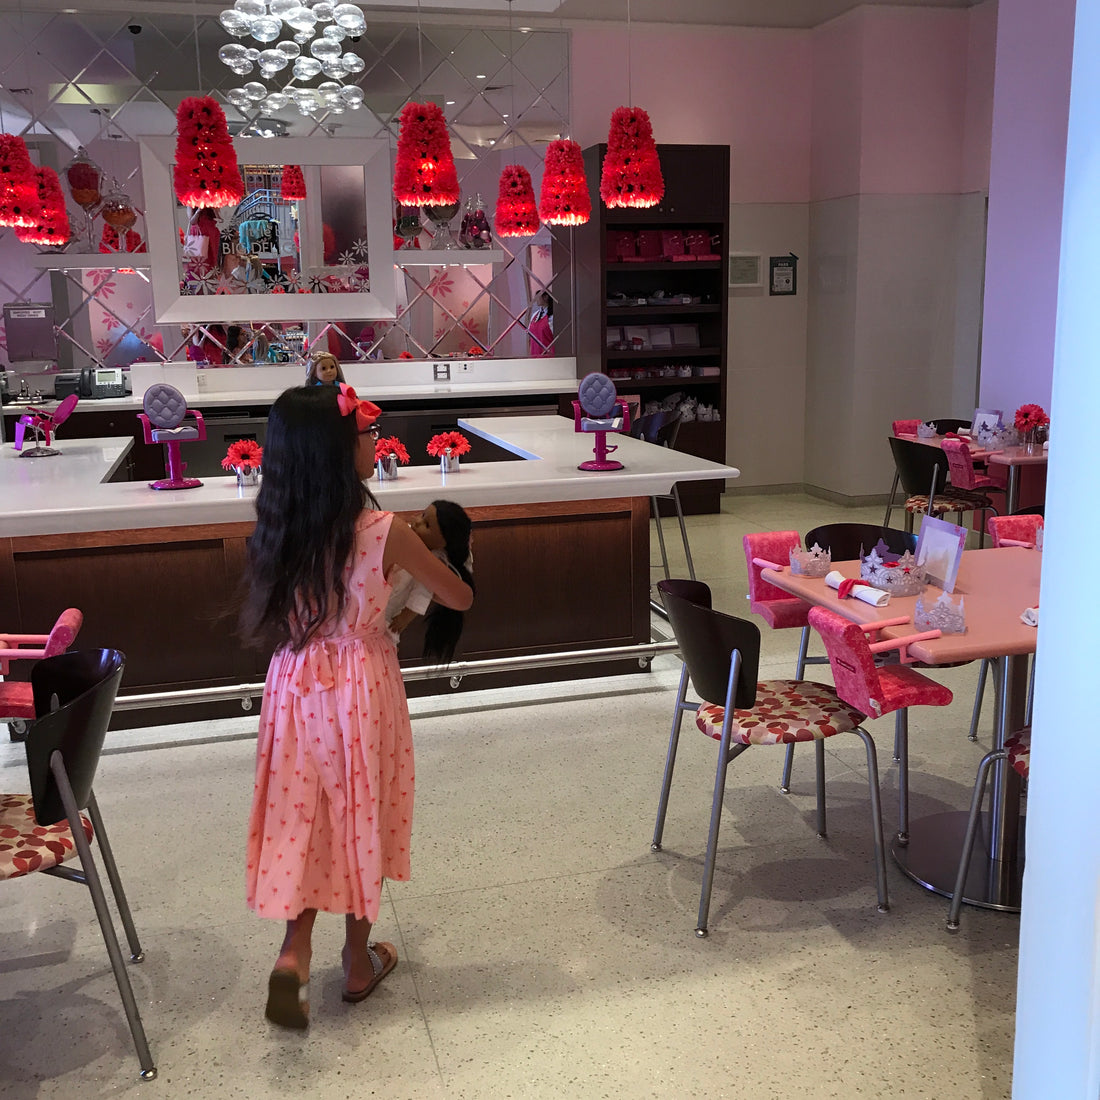 Classic Girl at the American Girl Doll store bistro